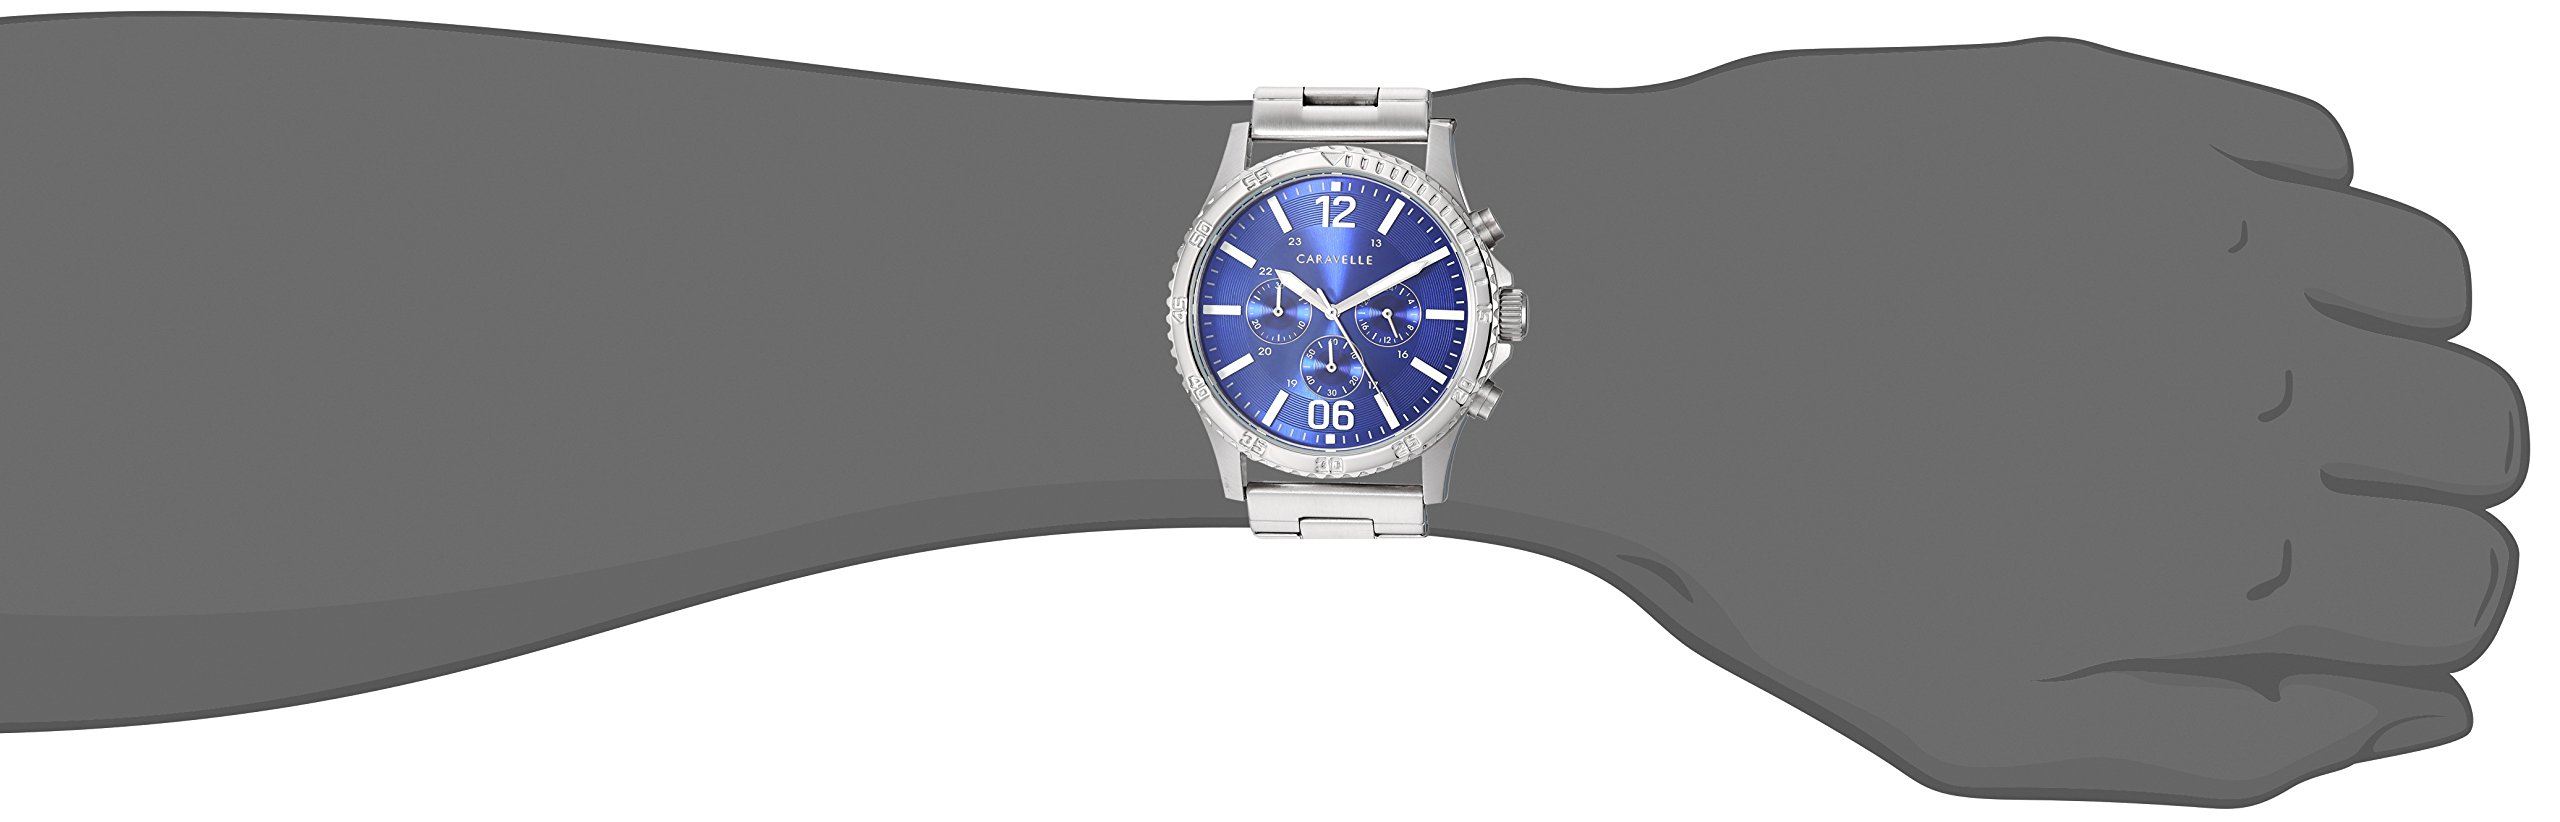 Caravelle by Bulova Men's Sport Chronograph Quartz Silver Tone Stainless Steel Watch, Blue Dial Style: 43A145